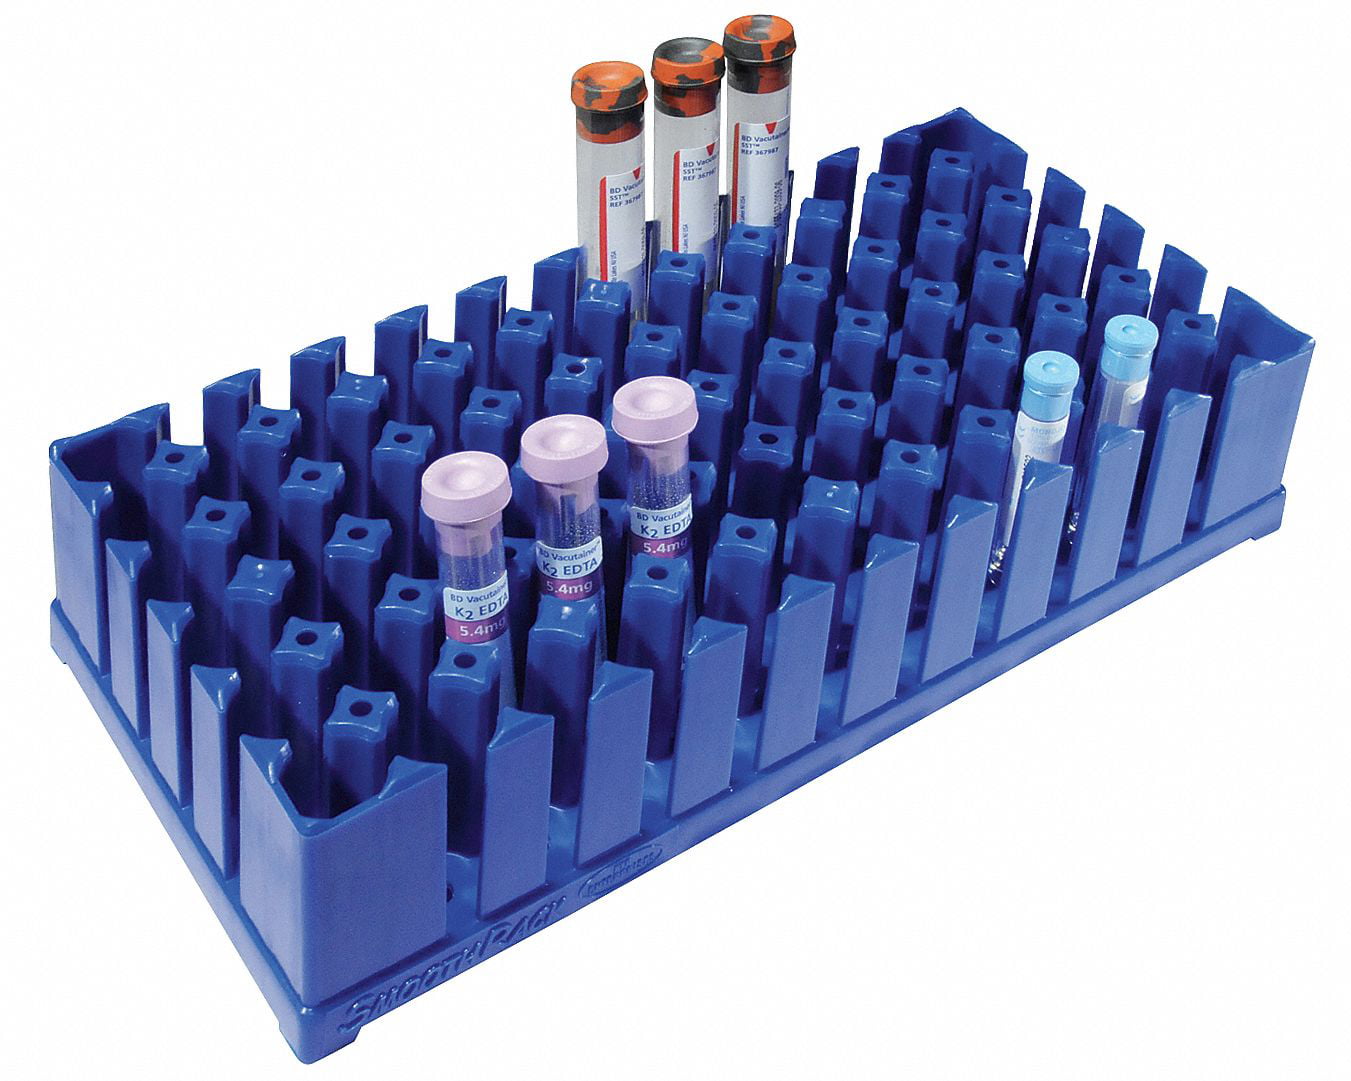 5x9-1/2 In Smooth Test Tube Rack Blue